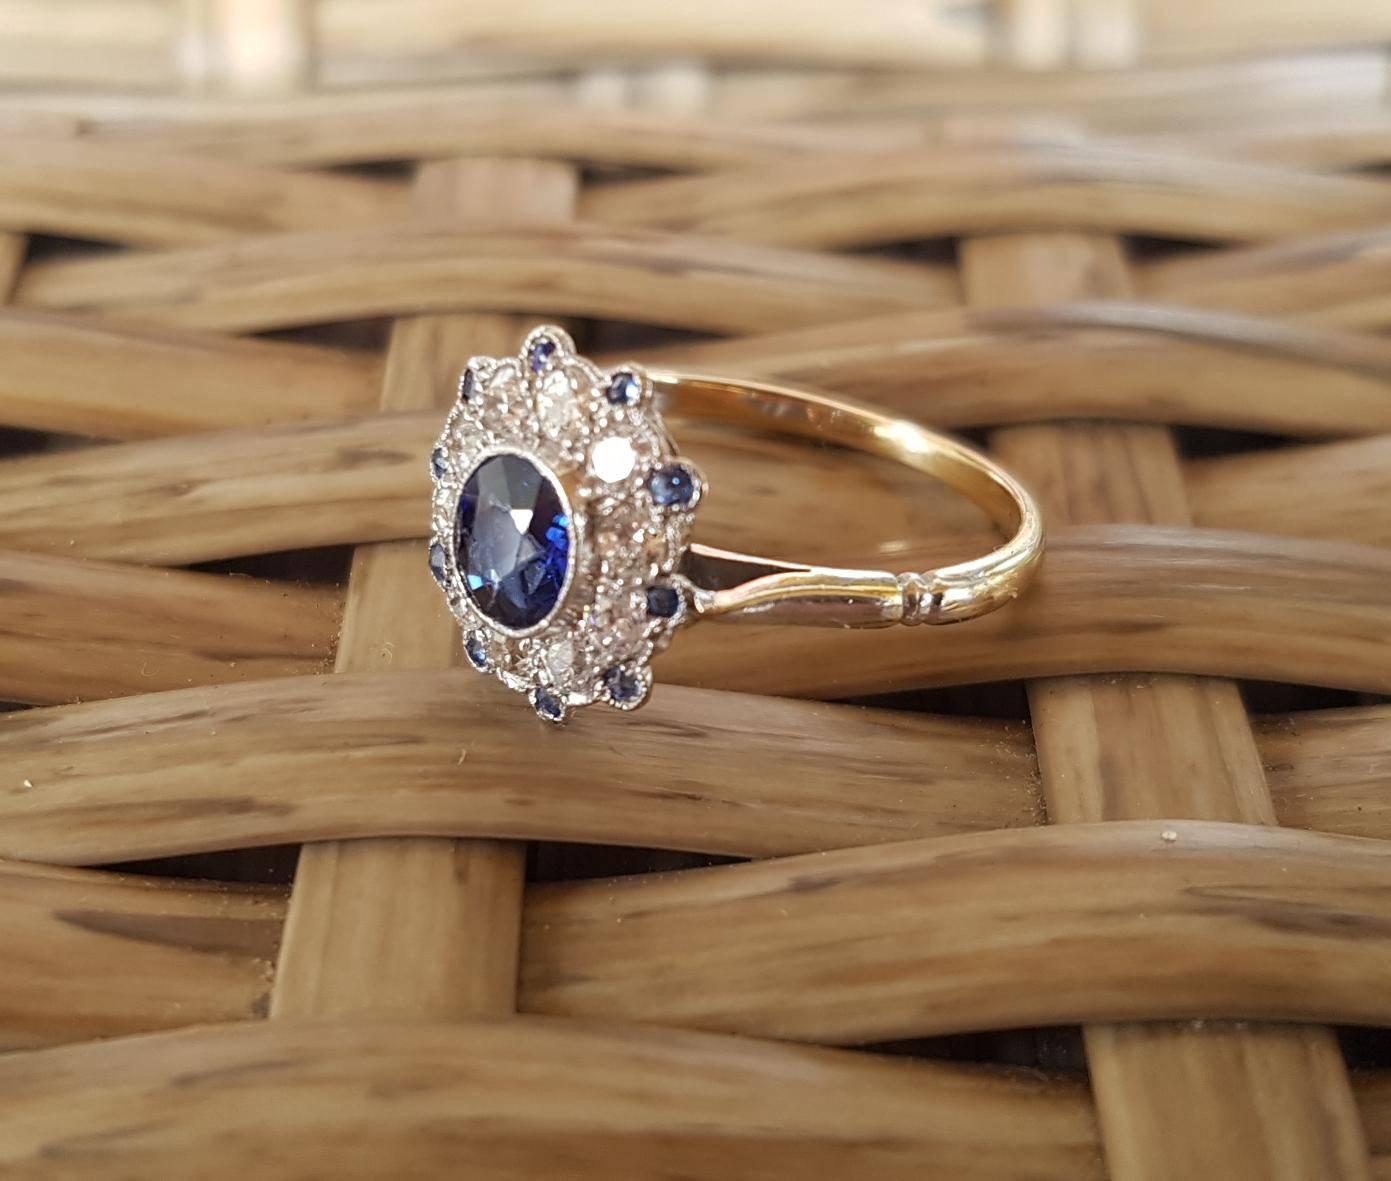 Very pretty 18ct white gold art deco sapphire and diamond cluster ring set with a centre deep blue oval facetted Ceylon sapphire surrounded by 10 old cut diamonds(early modern brilliant cut) 10=0.37ct H/VS and 10 small round sapphires. Currently